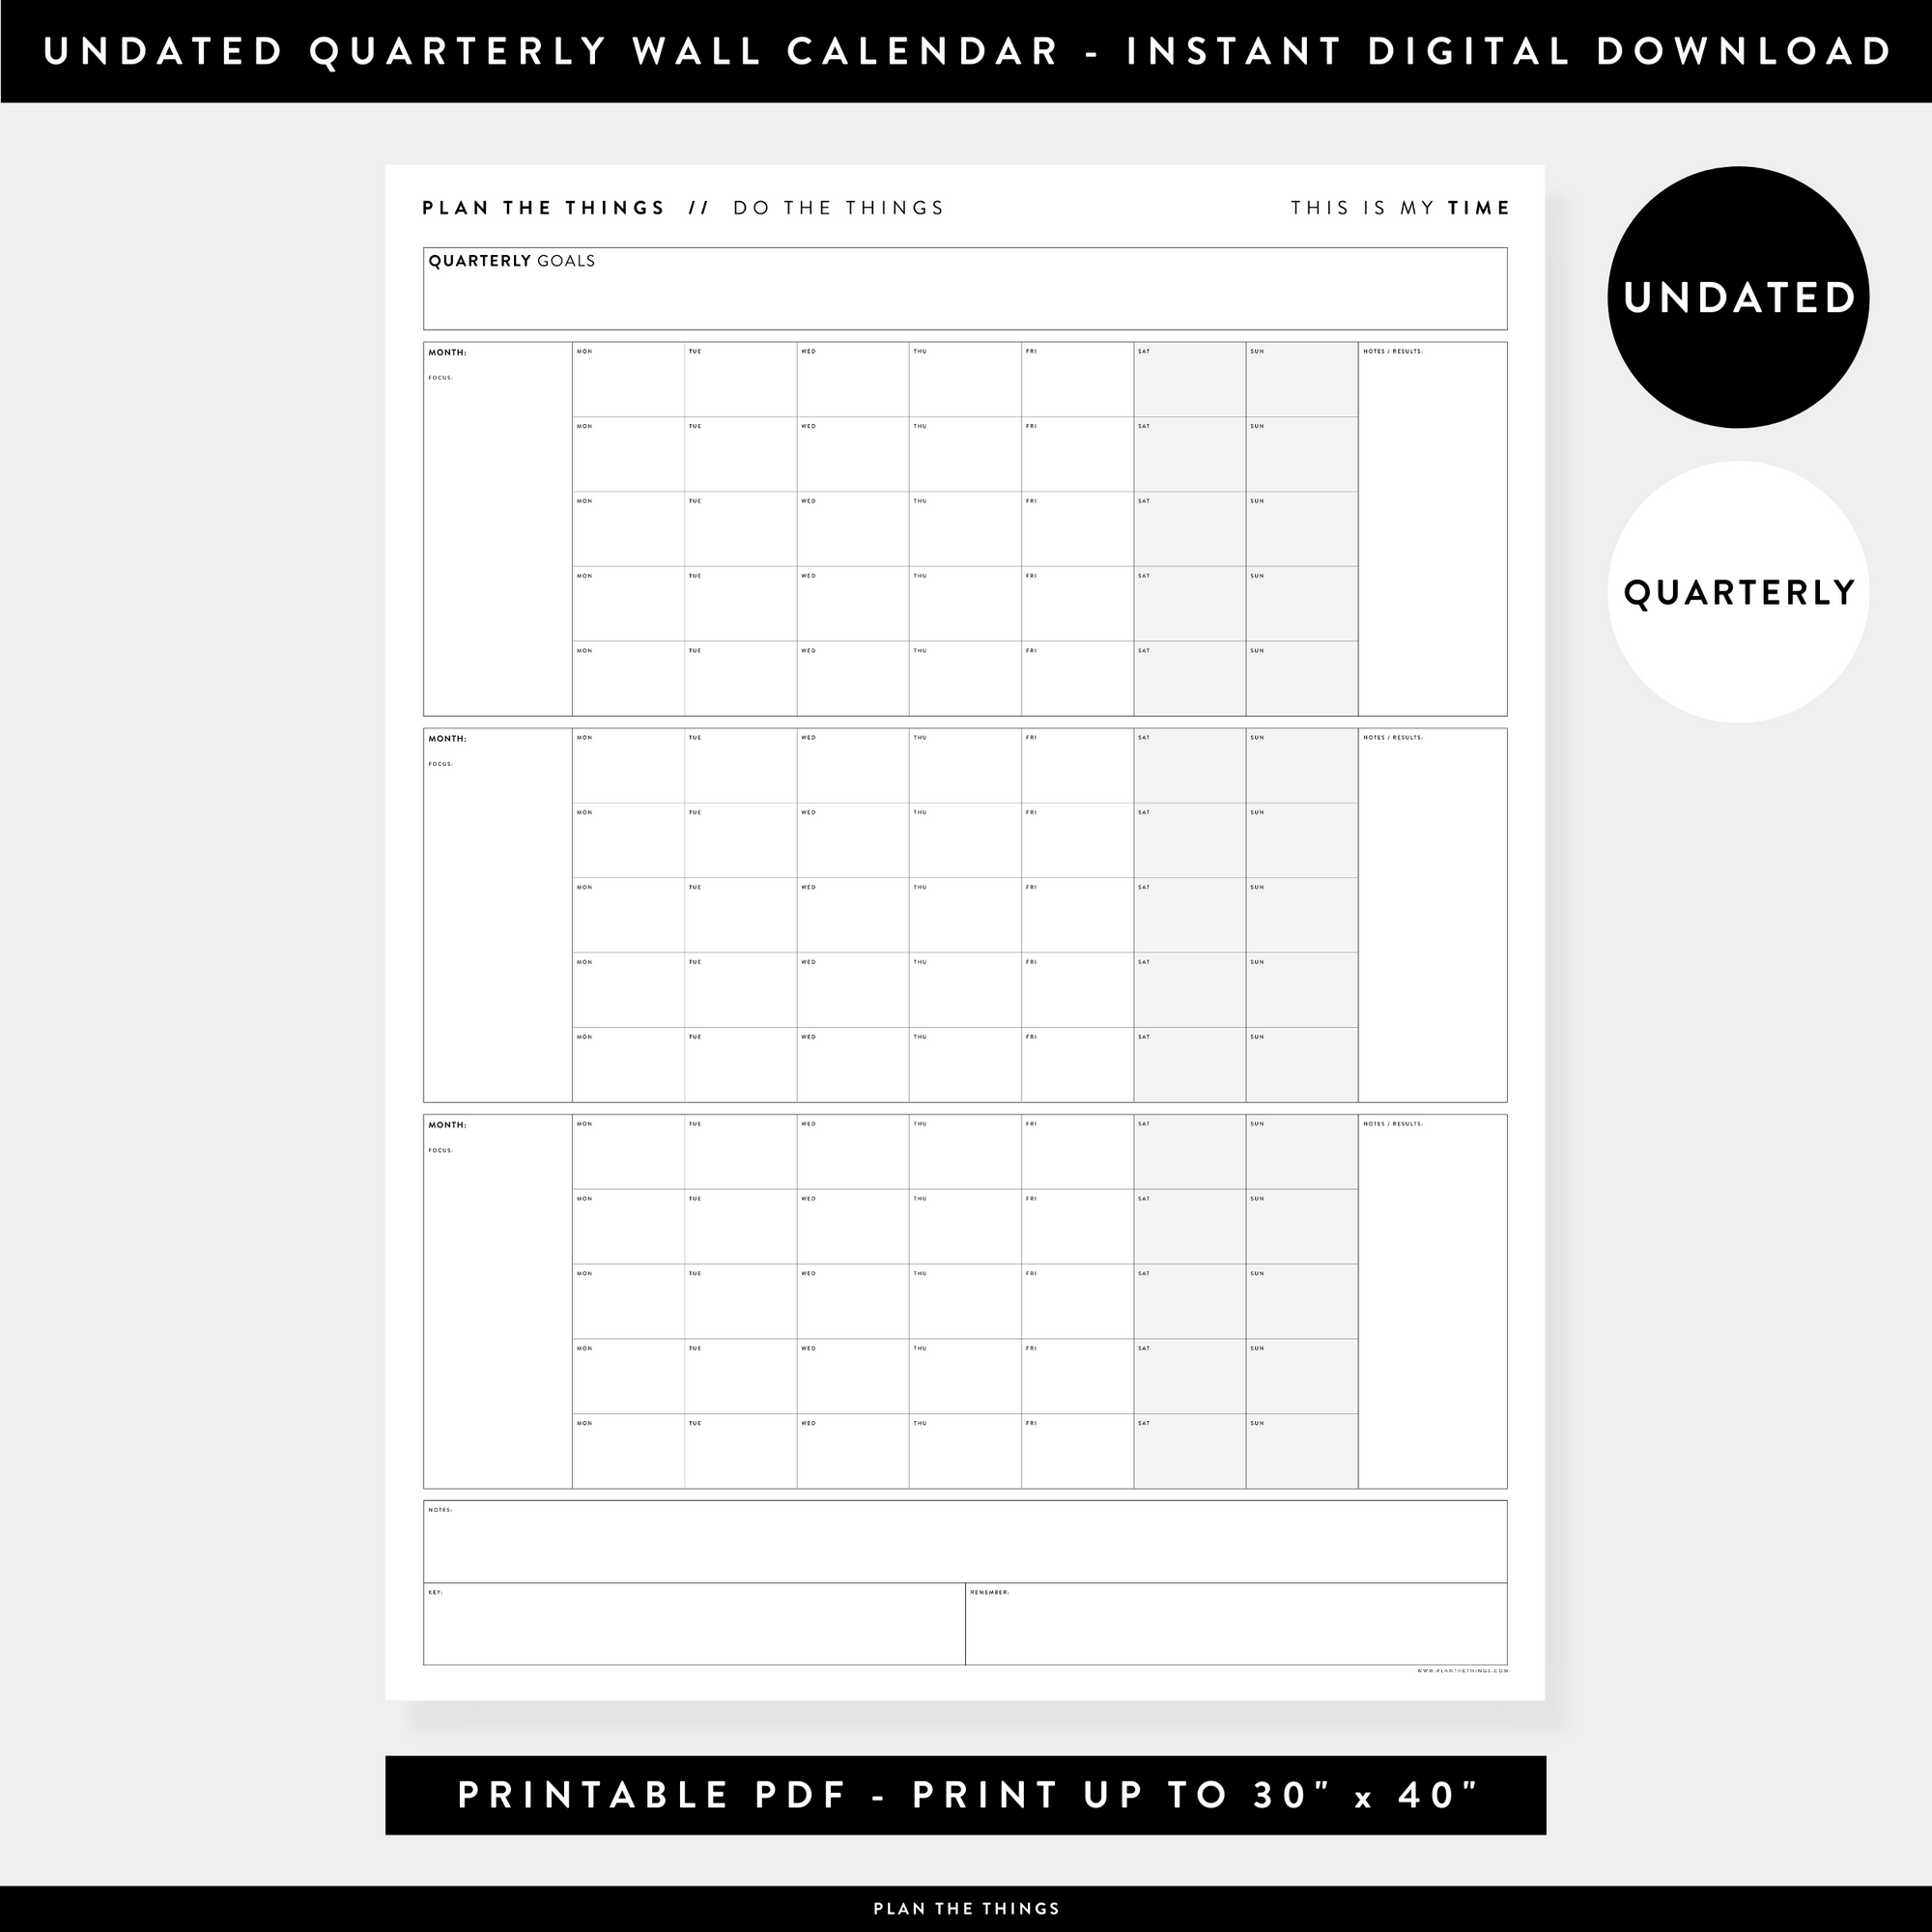 PRINTABLE UNDATED QUARTERLY WALL CALENDAR - MONDAY START - GRAY WEEKENDS - INSTANT DOWNLOAD